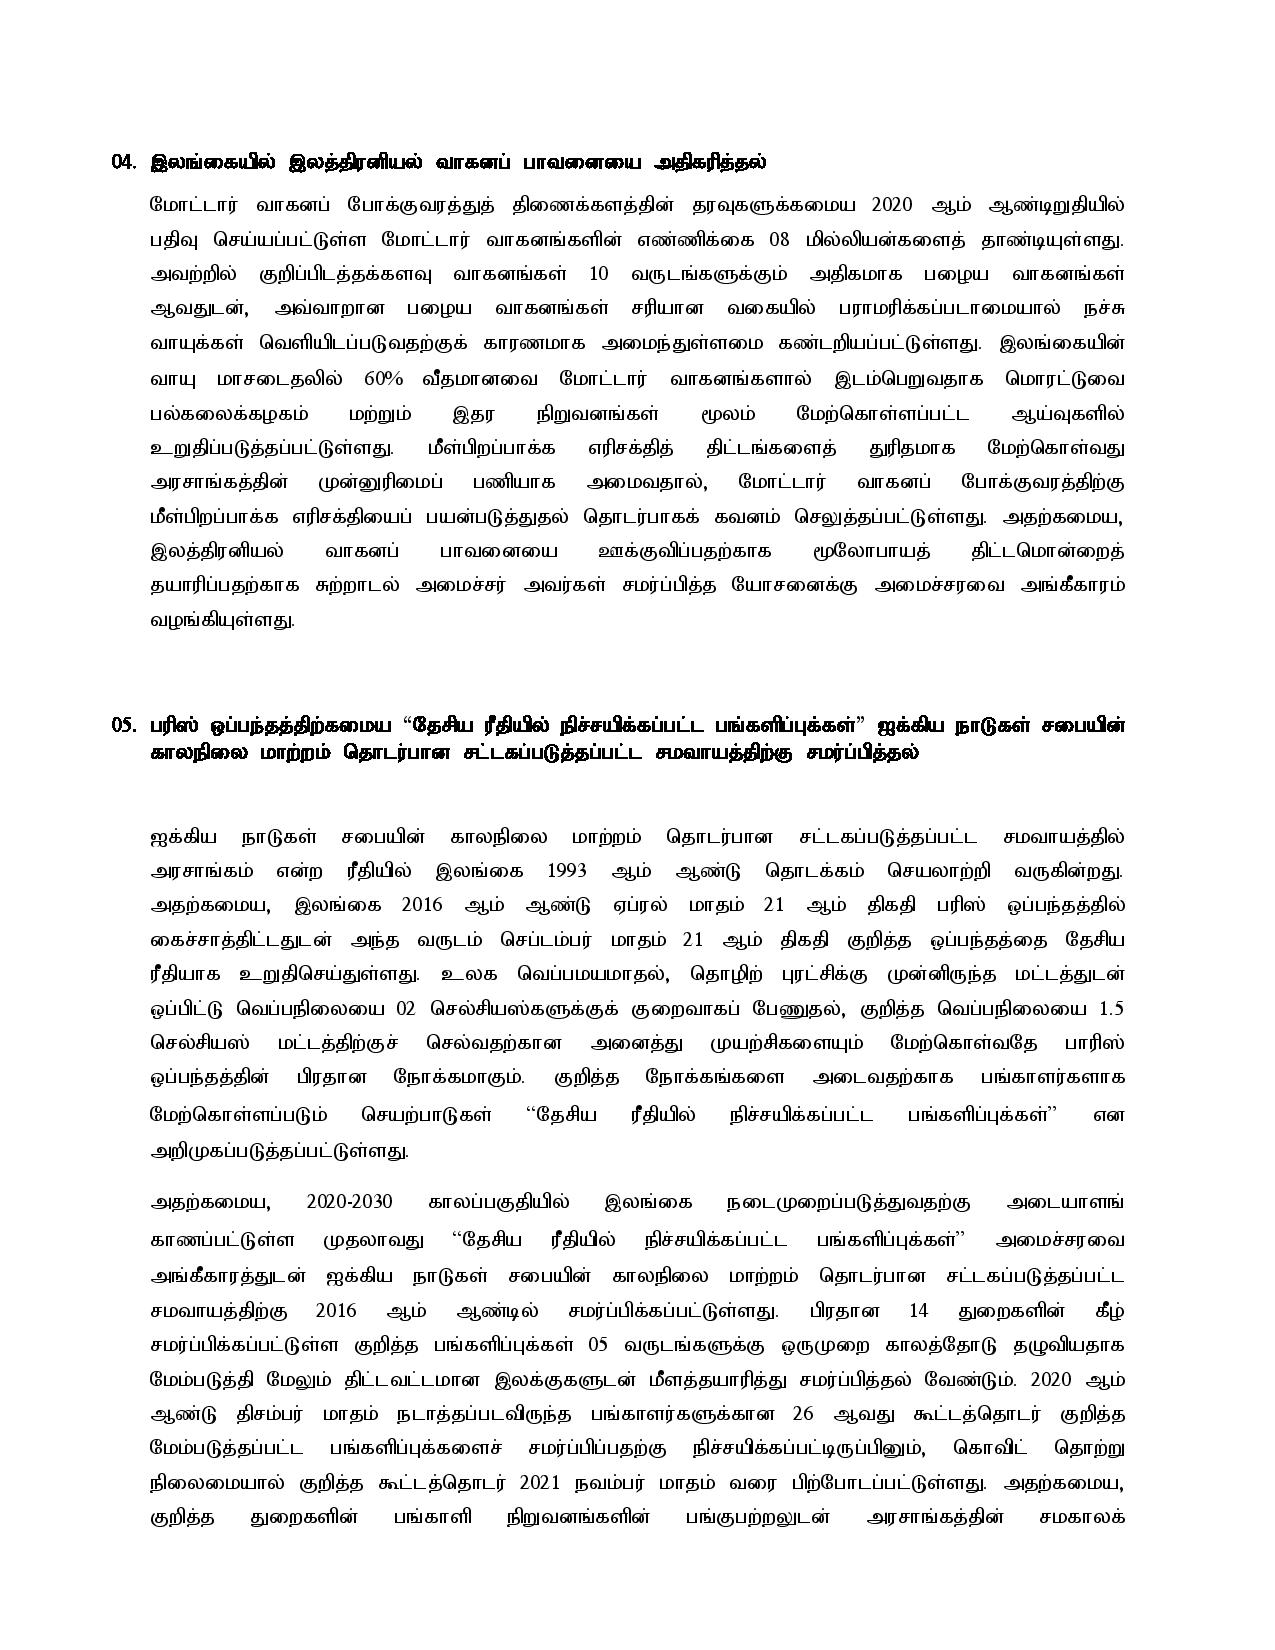 Cabinet Decision on 12.07.2021 Tamil page 002